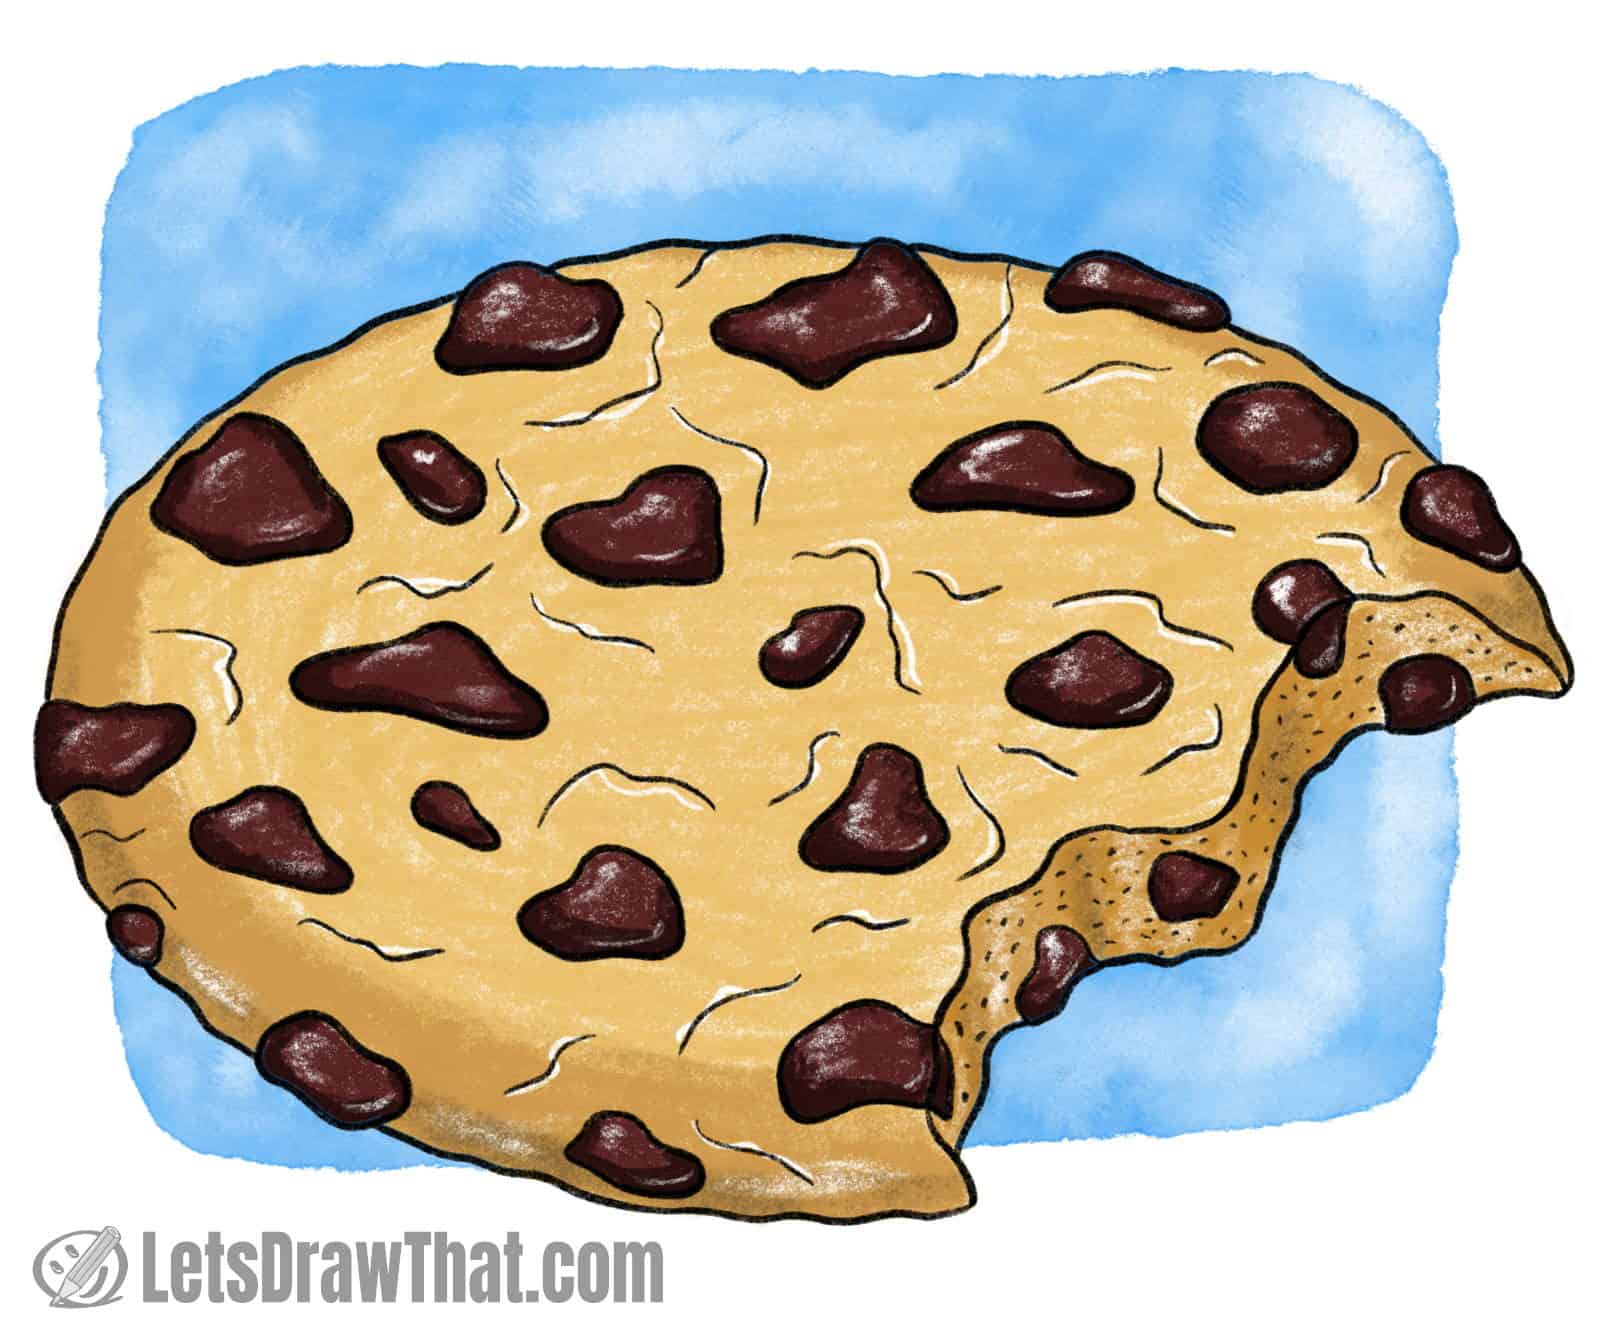 How to draw a cookie from the side view: finished drawing coloured-in